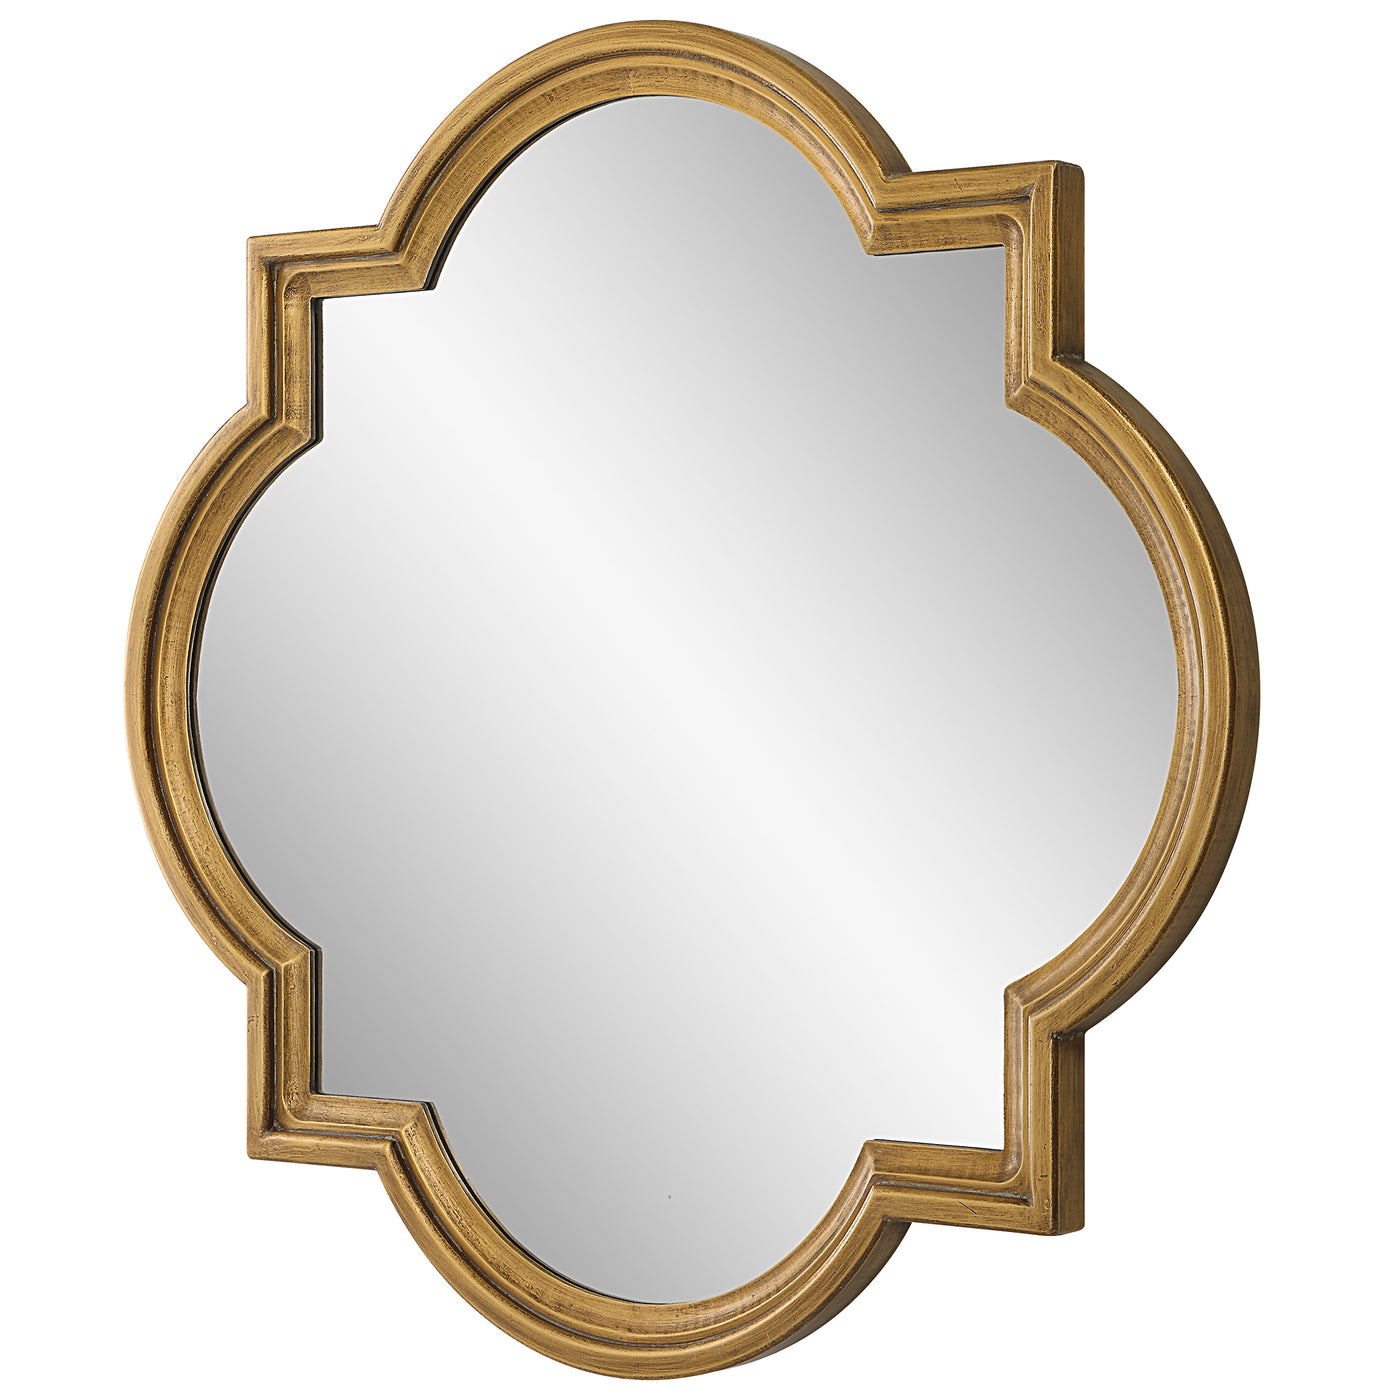 The Woodstock - Decorative Gold Framed Mirror